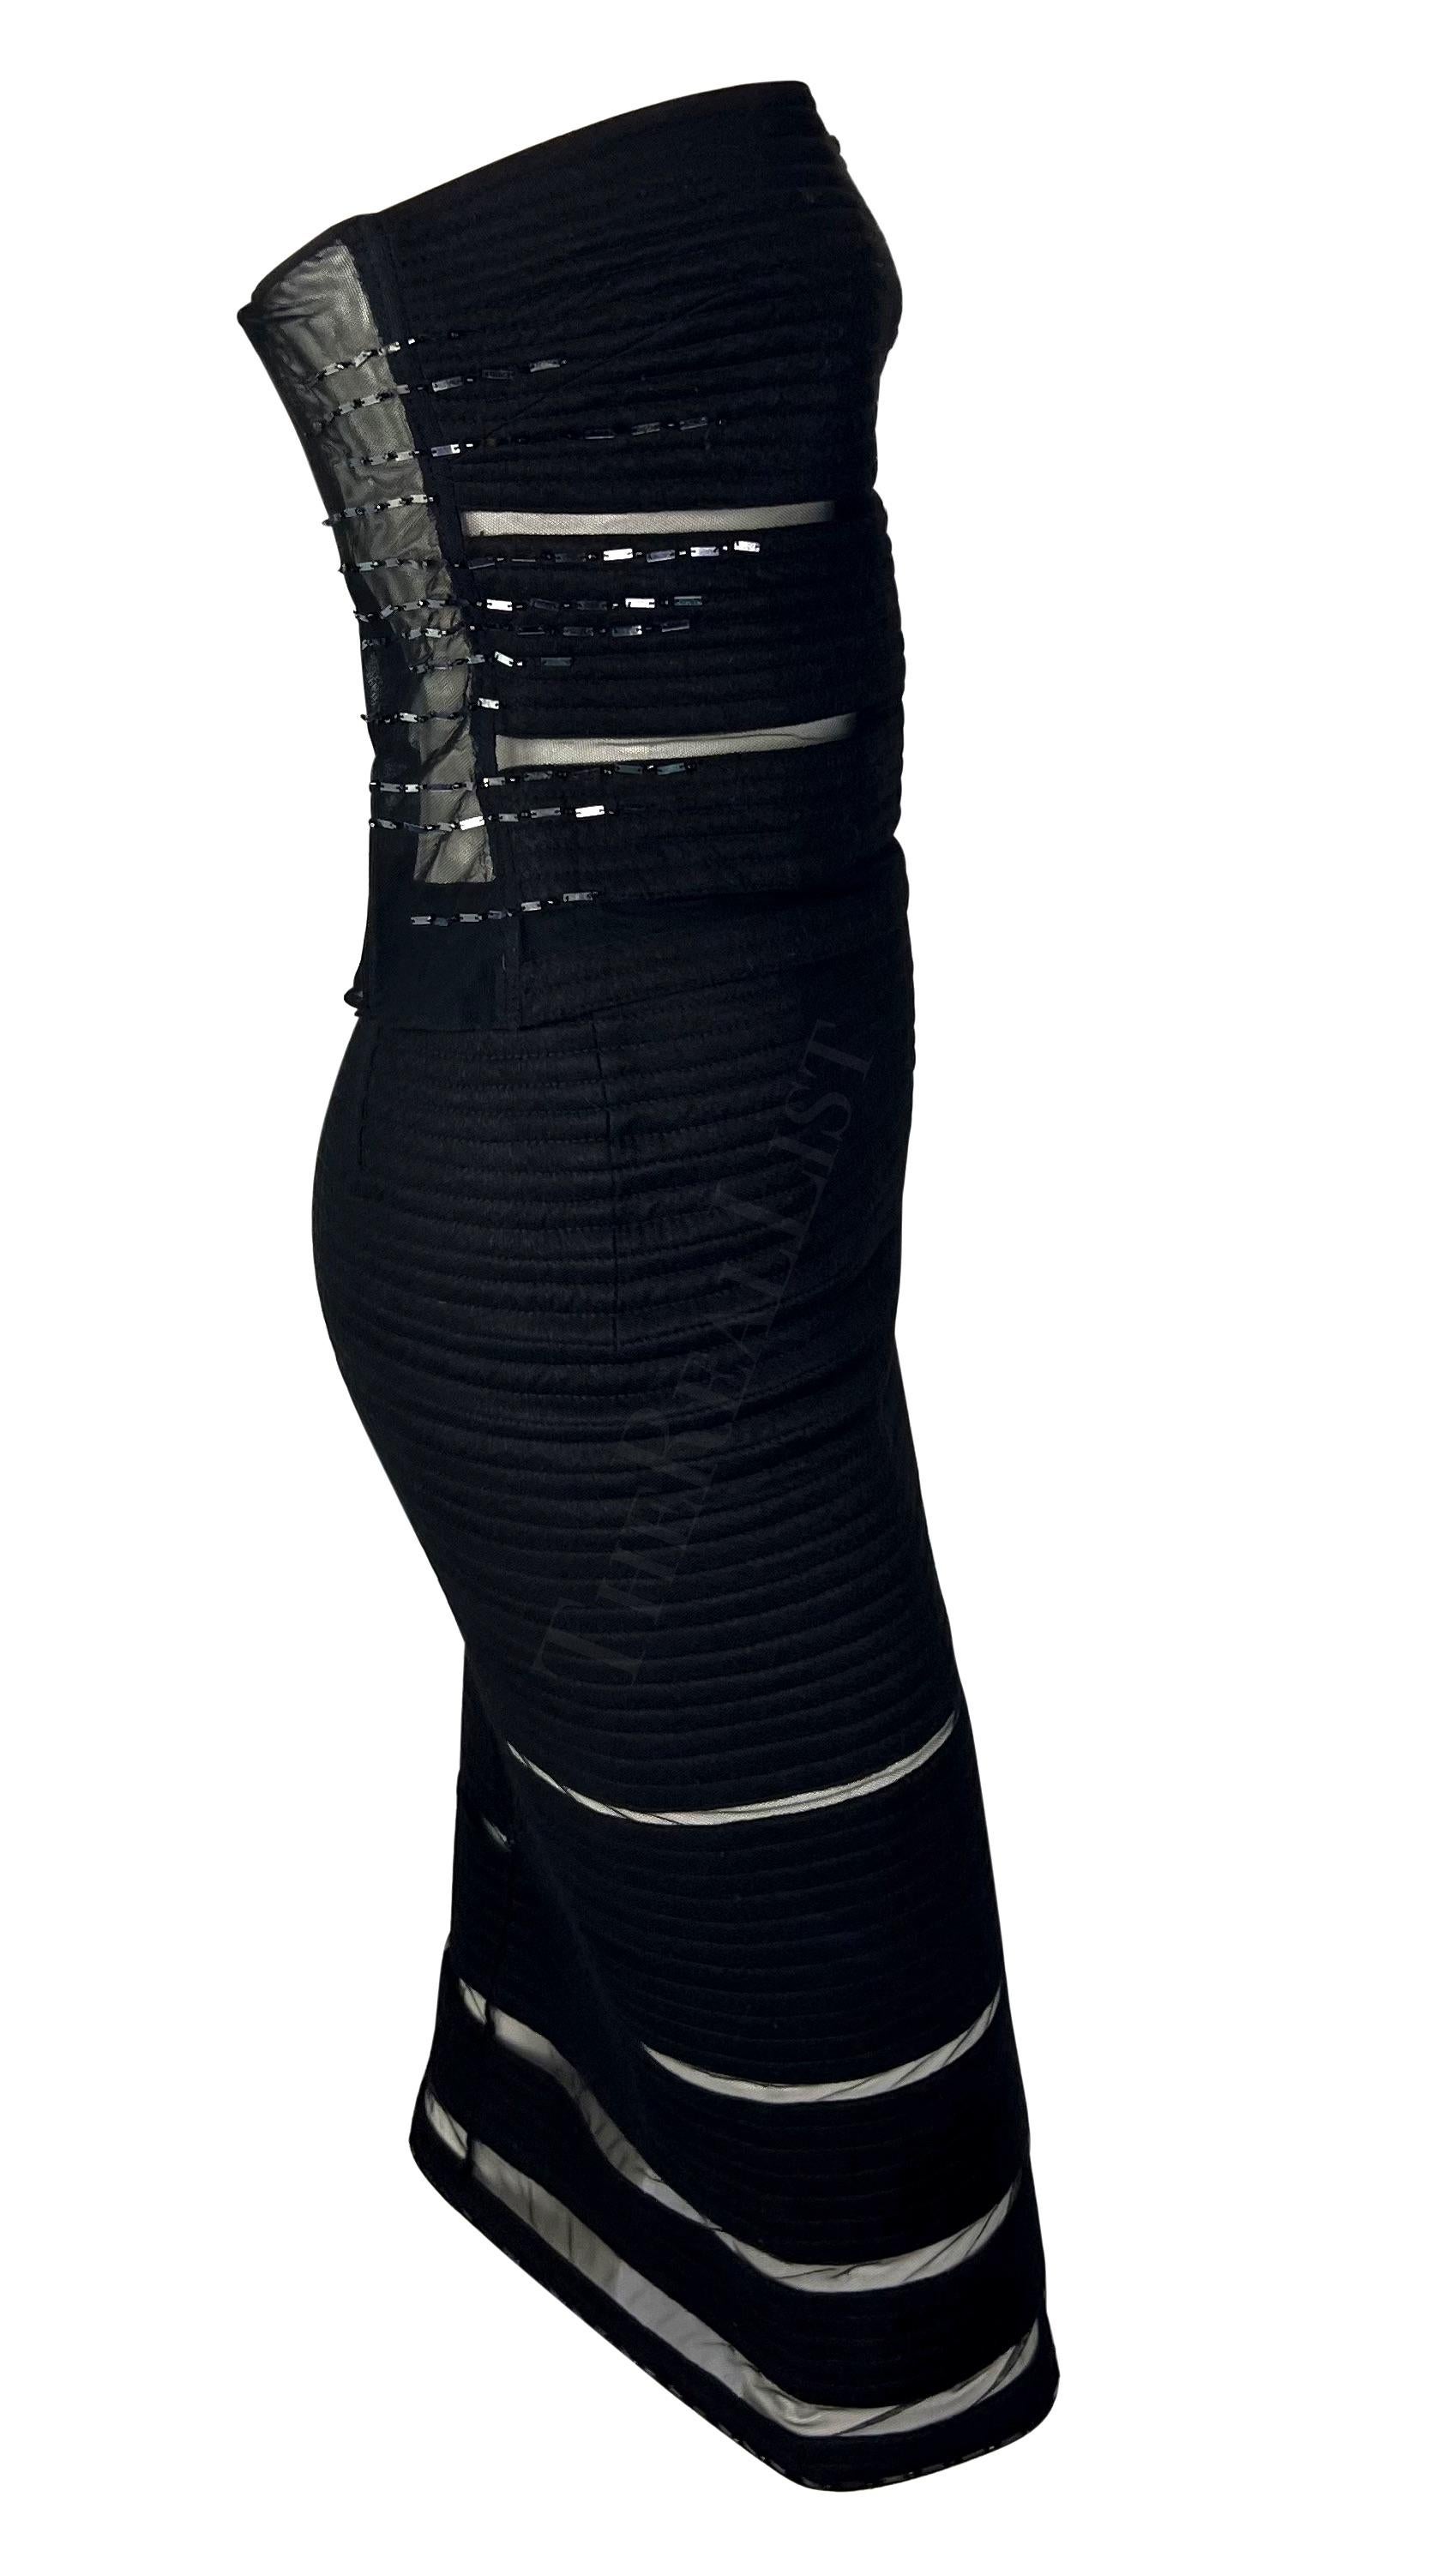 Presenting a fabulous black quilted Gianni Versace skirt set, designed by Donatella Versace. From 1999, this set consists of a pencil skirt and a matching sleeveless top. Both the top and skirt feature a horizontal quilted design with rows of sheer